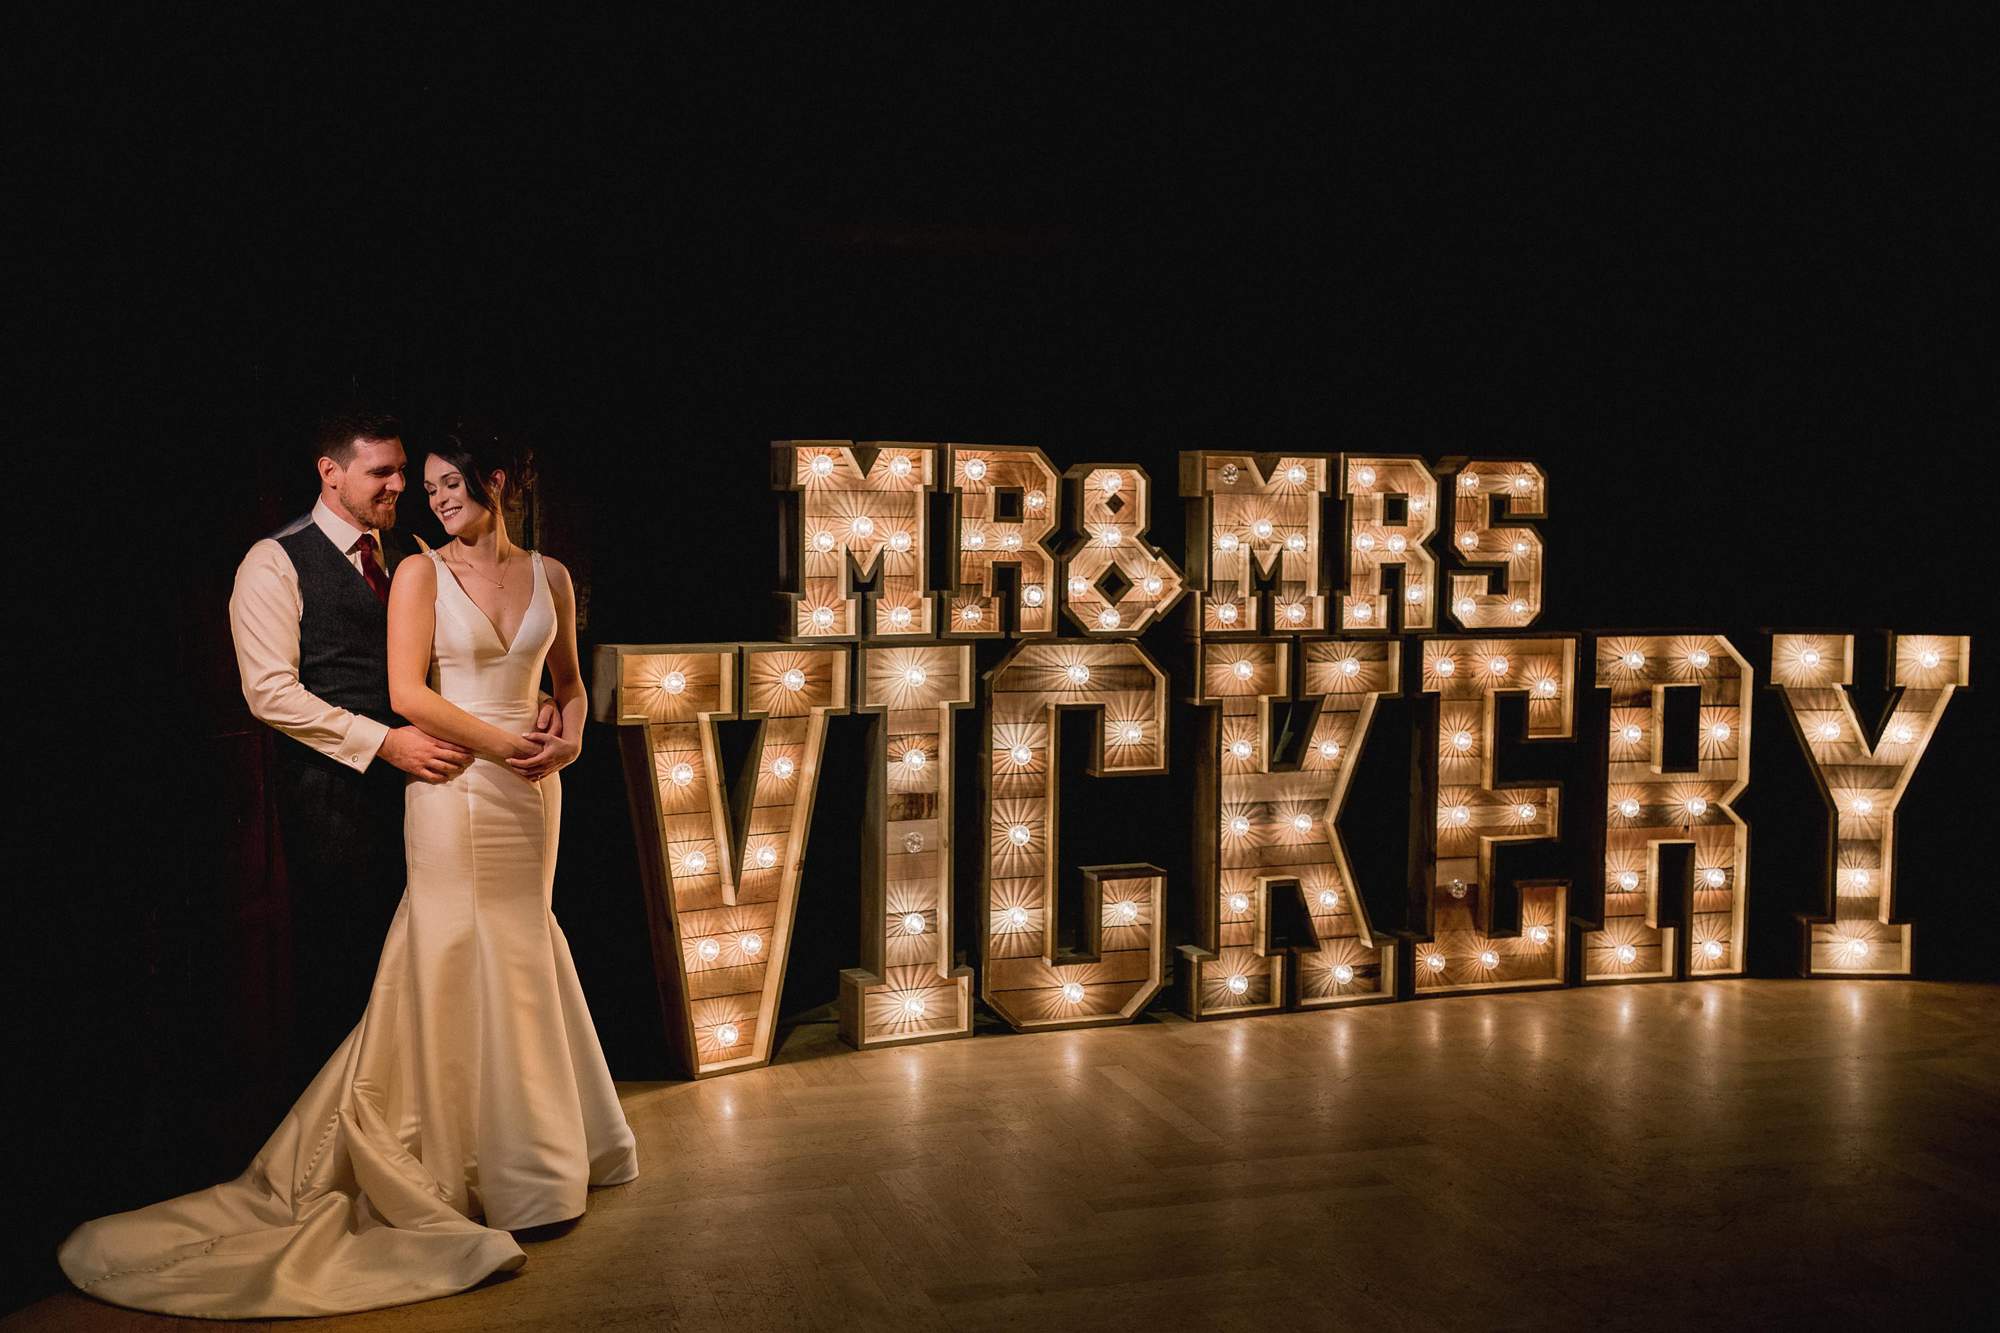 A fantastic Winter wedding at Great Fosters